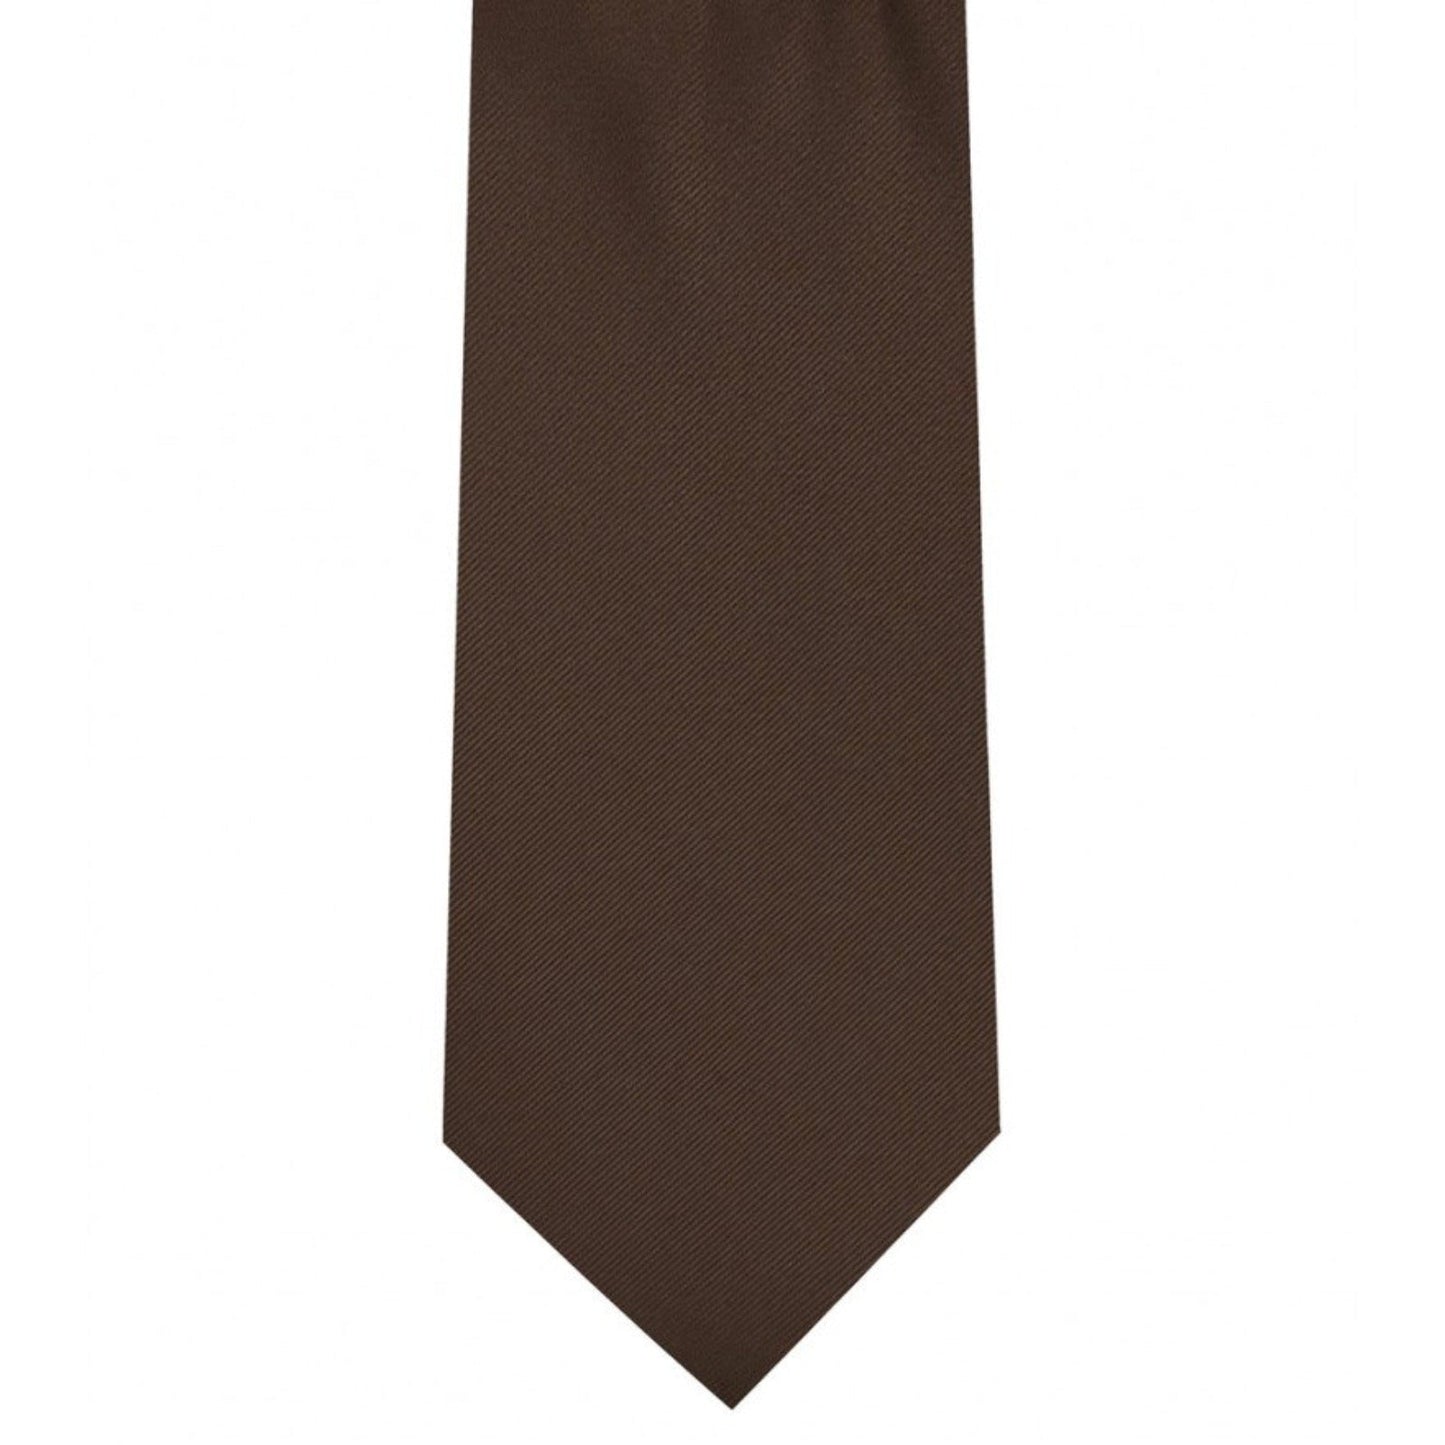 Classic Chocolate Brown Tie Ultra Skinny tie width 2.25 inches With Matching Pocket Square | KCT Menswear